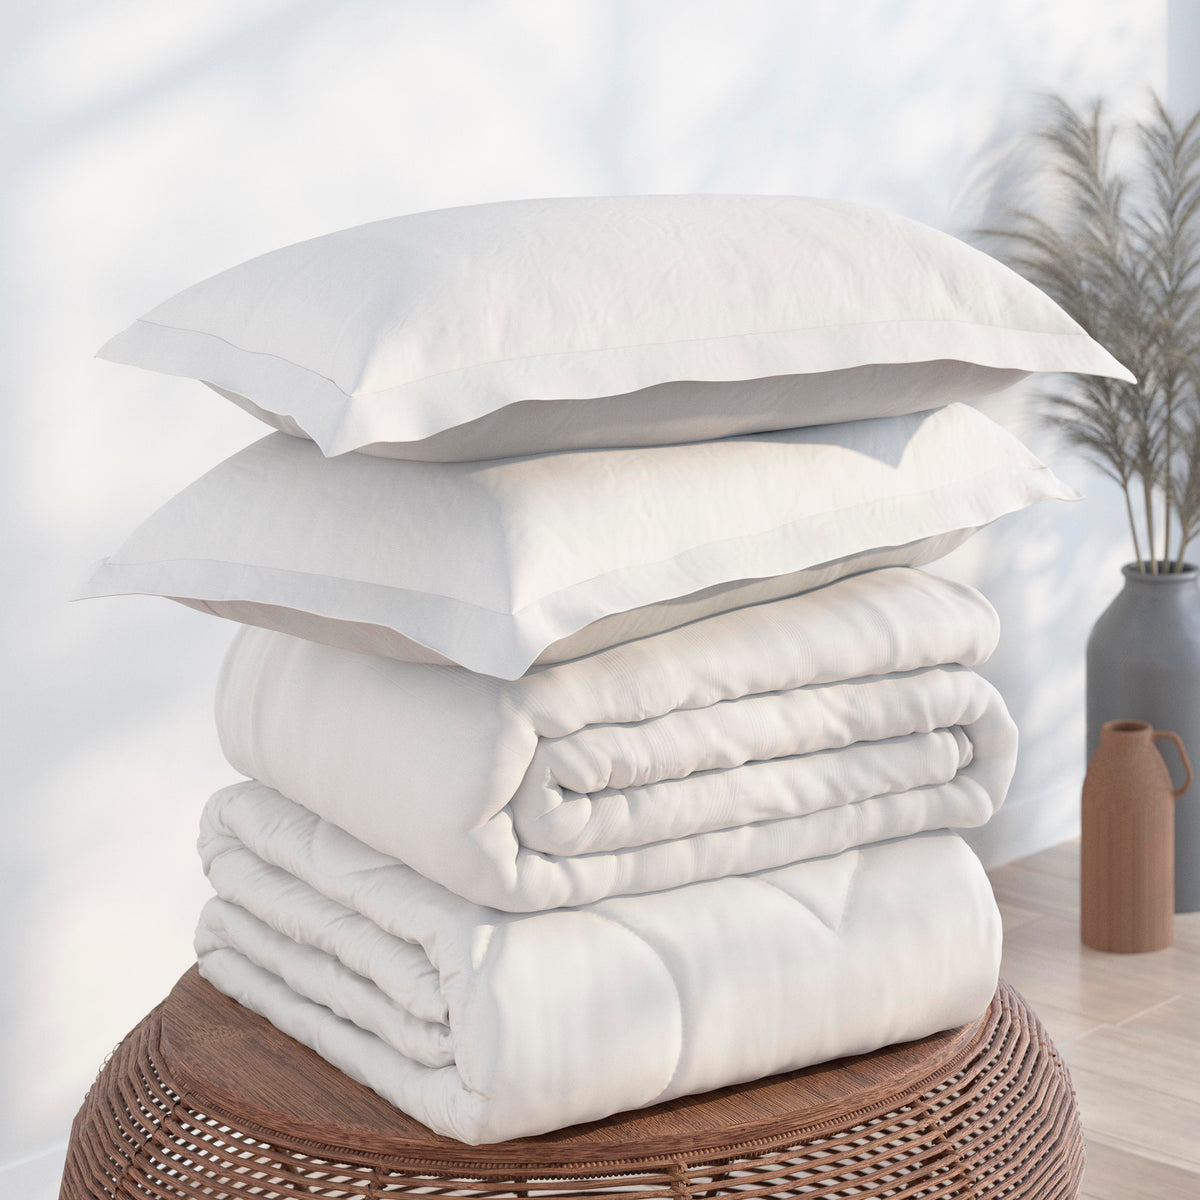 Image of the White Soft Touch Bundle on top of a brown table. The bedding shown includes (from top to bottom): 2 White Pillow Shams, a neatly folded White Soft Touch Duvet Cover, and a neatly folded Soft Touch Duvet Insert 